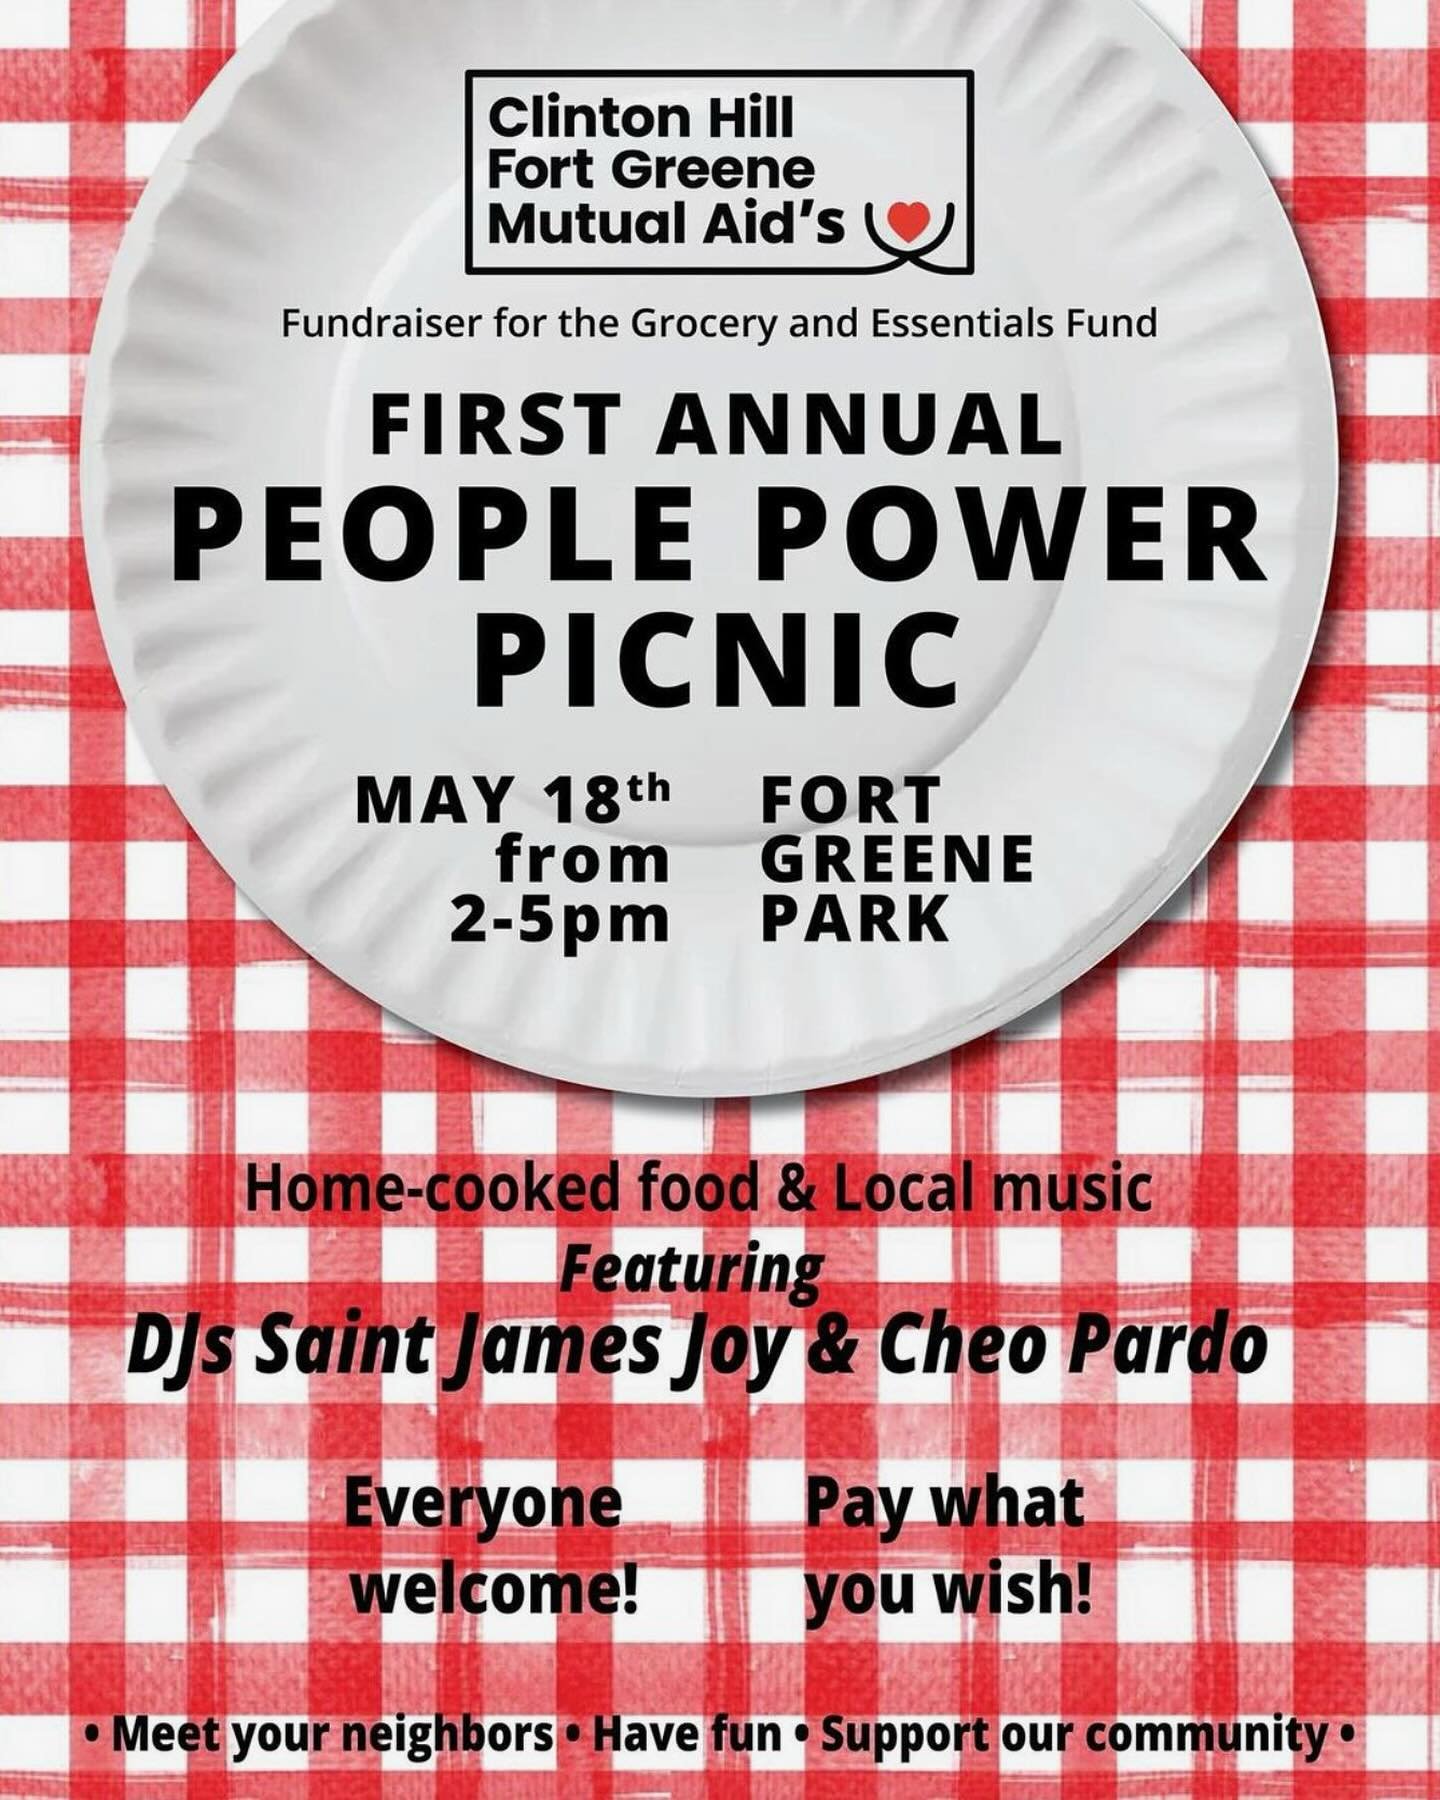 Join your neighbor&rsquo;s for Clinton Hill Fort Greene Mutual Aid&rsquo;s first annual People Power Picnic on Saturday, May 18, from 2-5pm in Fort Greene Park by the monument. Featuring home-cooked food and hometown (and world famous) DJs &mdash; Sa